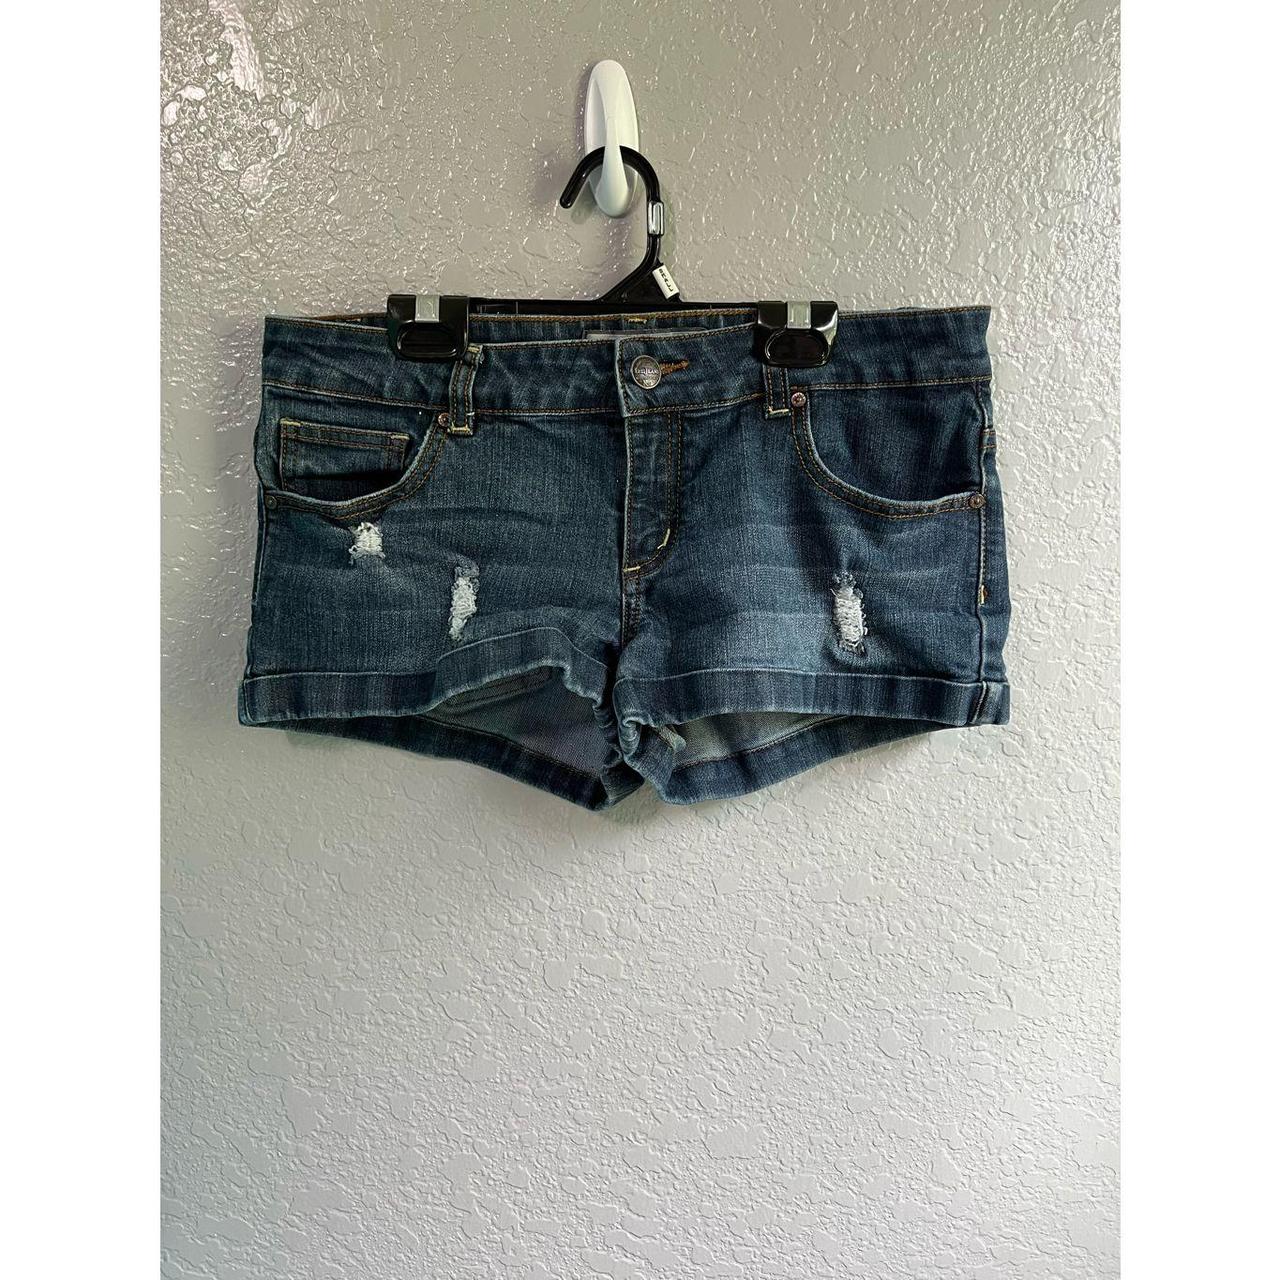 Product Image 1 - American vintage iris jeans size